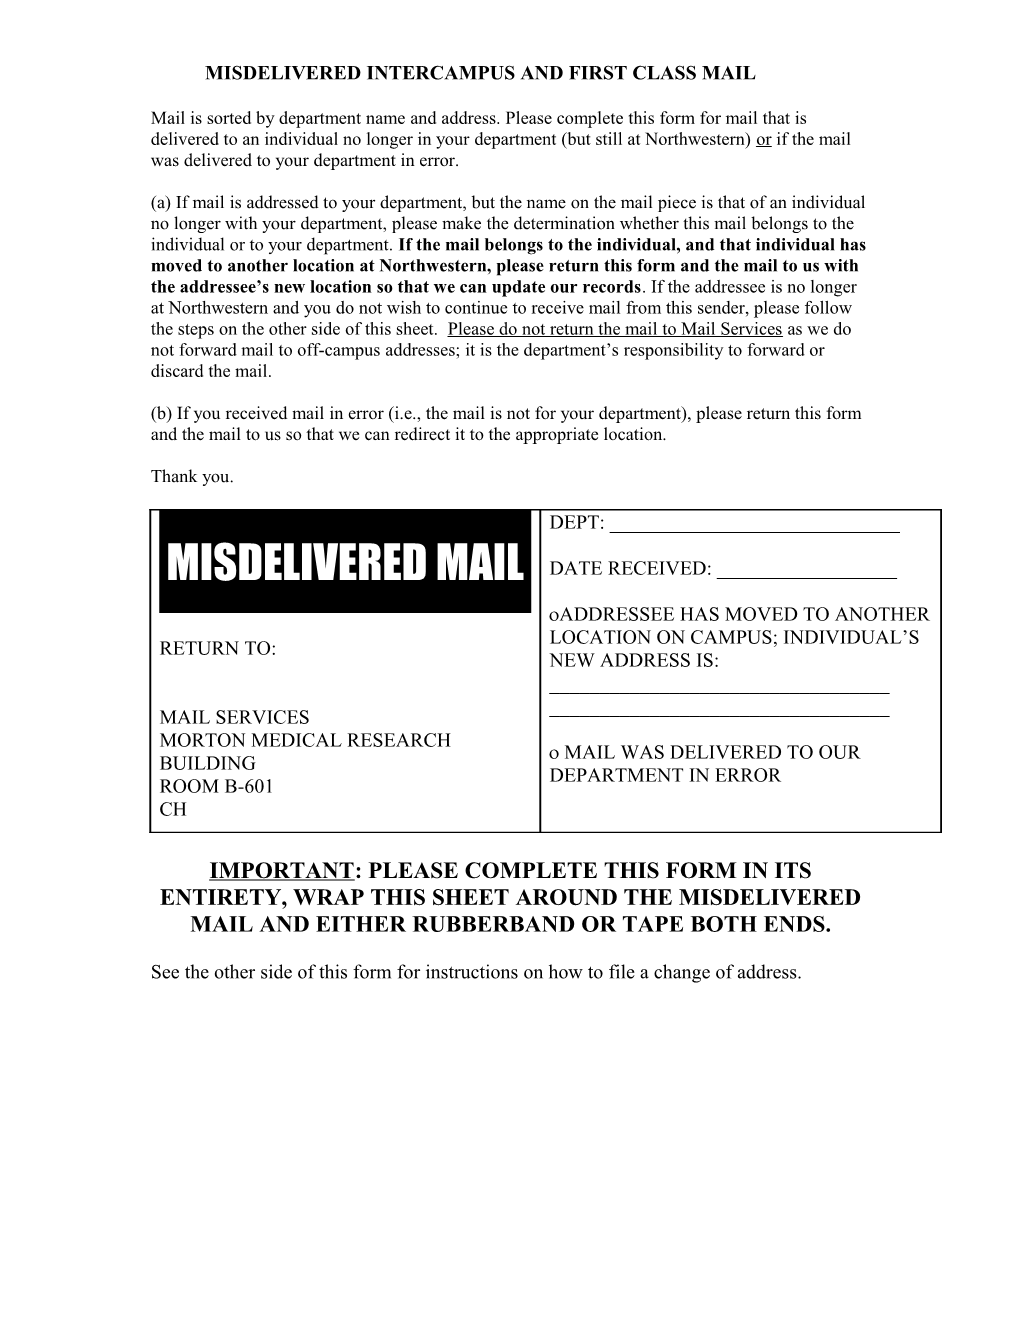 Misdelivered First Class Mail